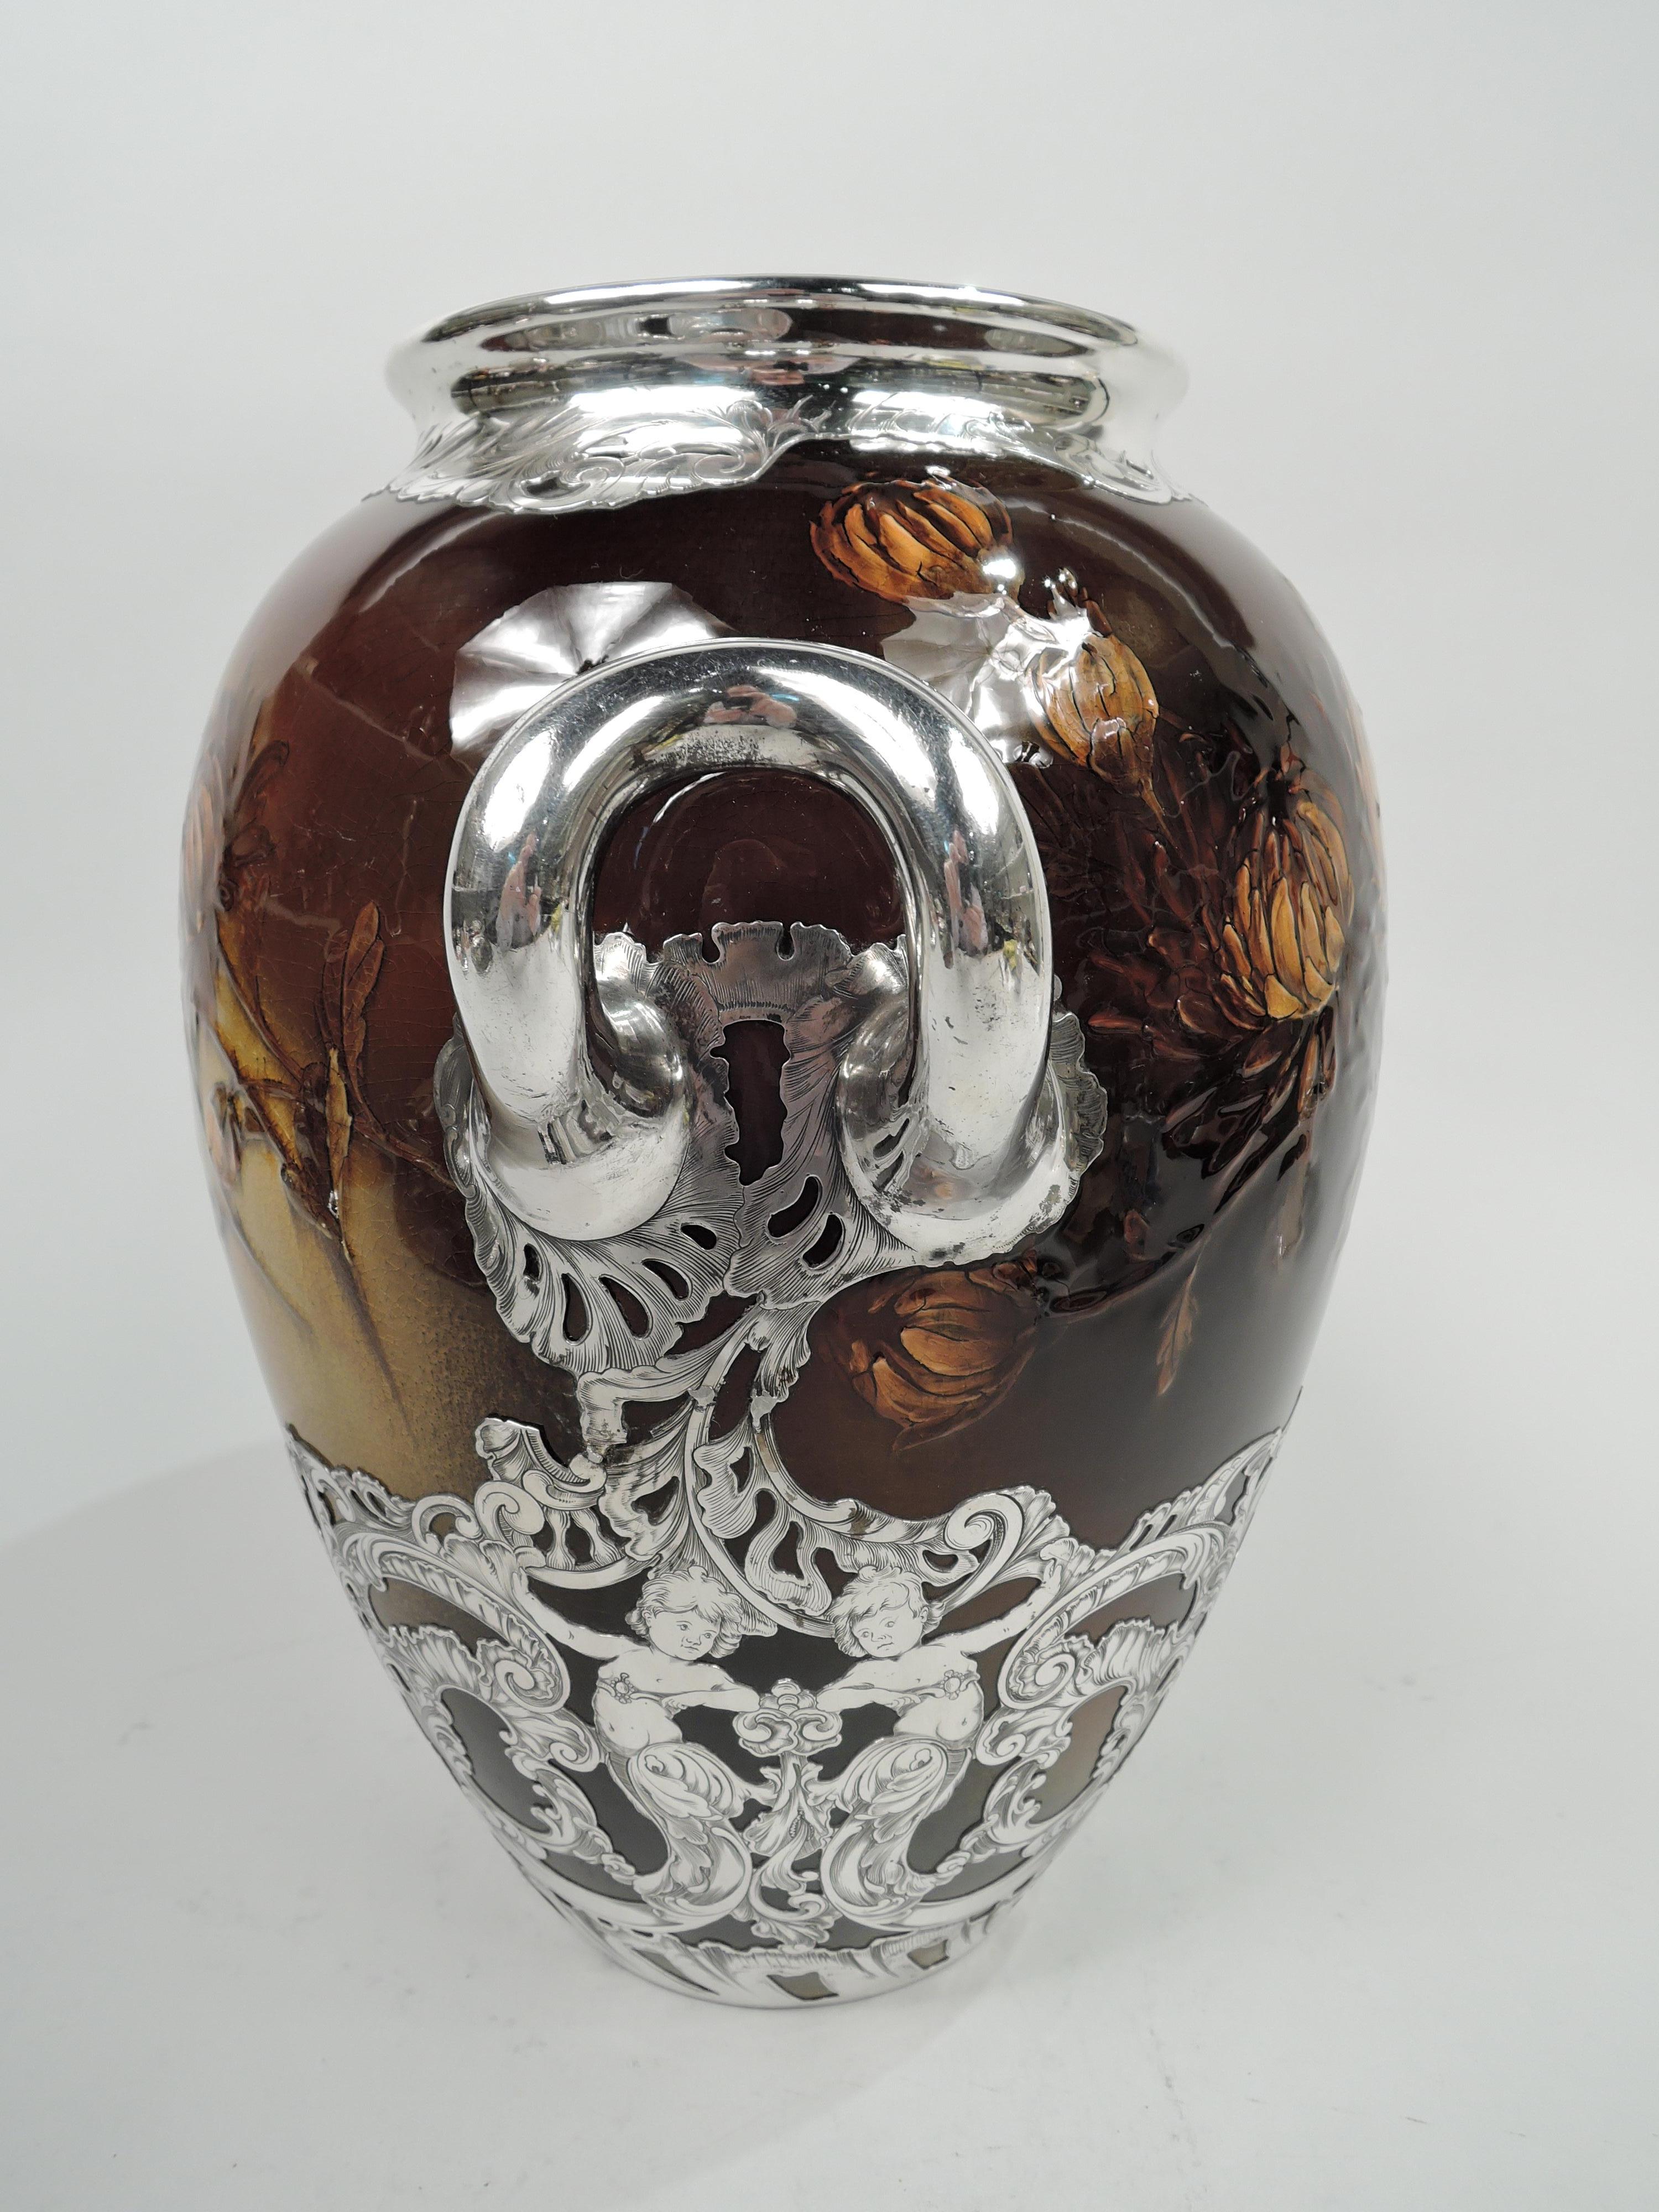 Large Art Nouveau Craftsman glazed earthenware vase. Made by Rookwood Pottery in Cincinnati in 1892. Ovoid with silver bracket handles. Shaded orange chrysanthemums emerging from umbrous brown ground. Overlay in form of dense leafing scrollwork and